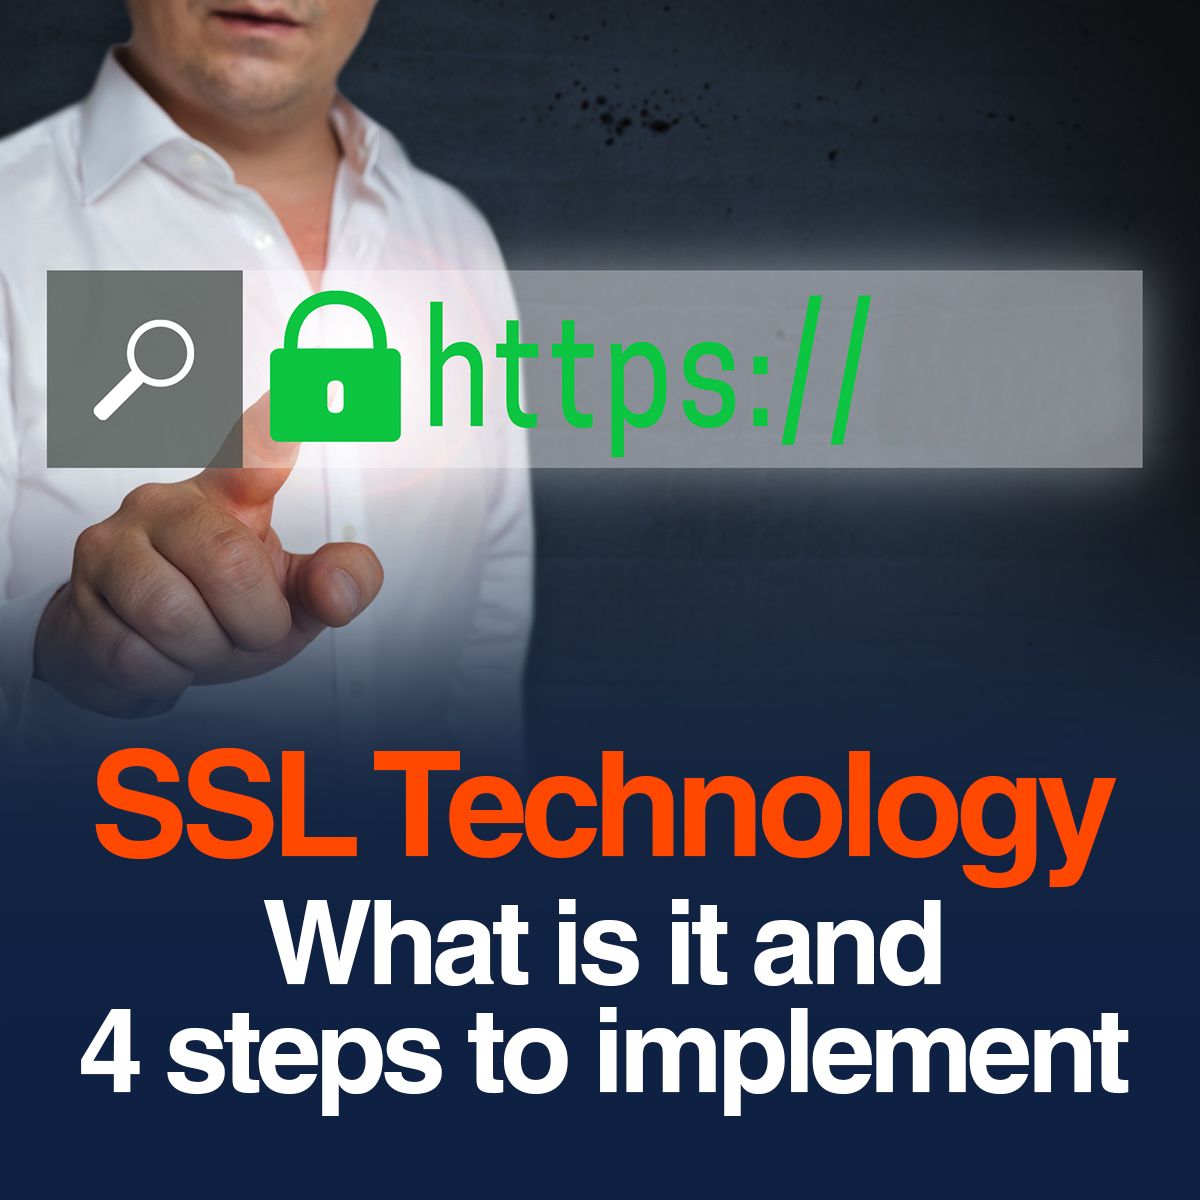 SSL Technology What is it and 4 steps to implement